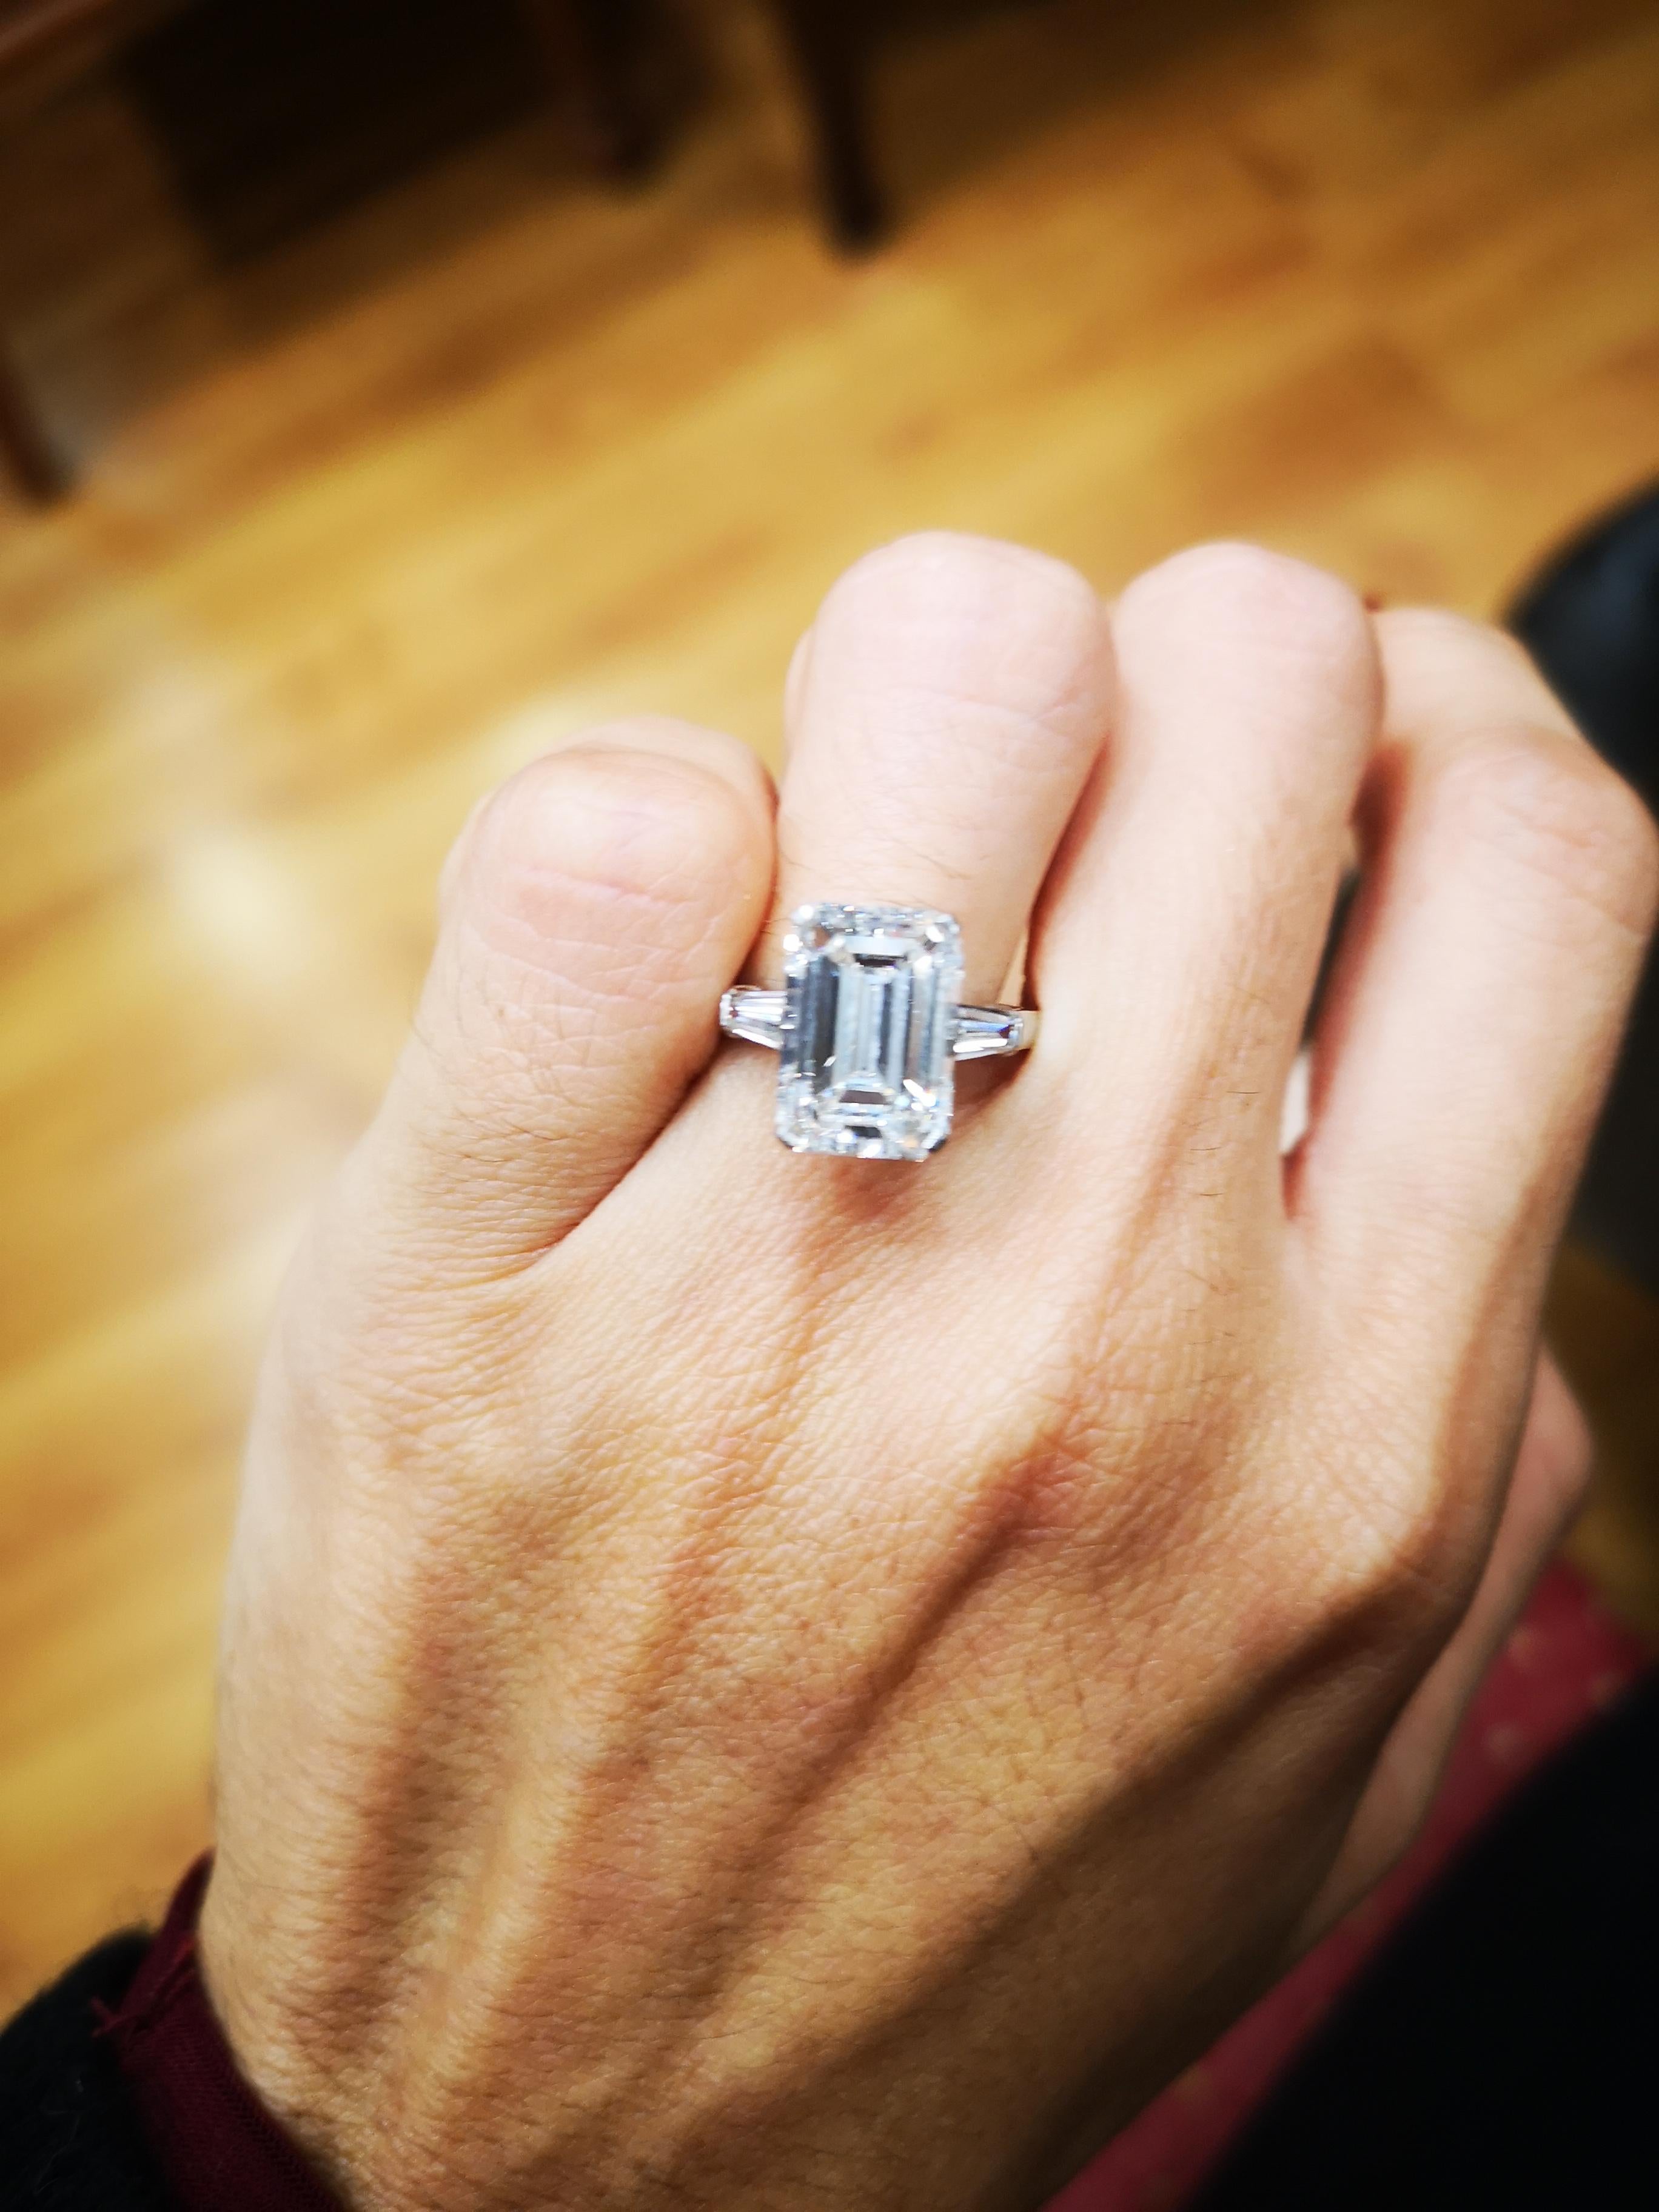 Superb 8 Carat Emerald Cut Engagement Ring


The main stone is a 8 carat diamond is extremely white and pure and has an excellent cut and polish 

